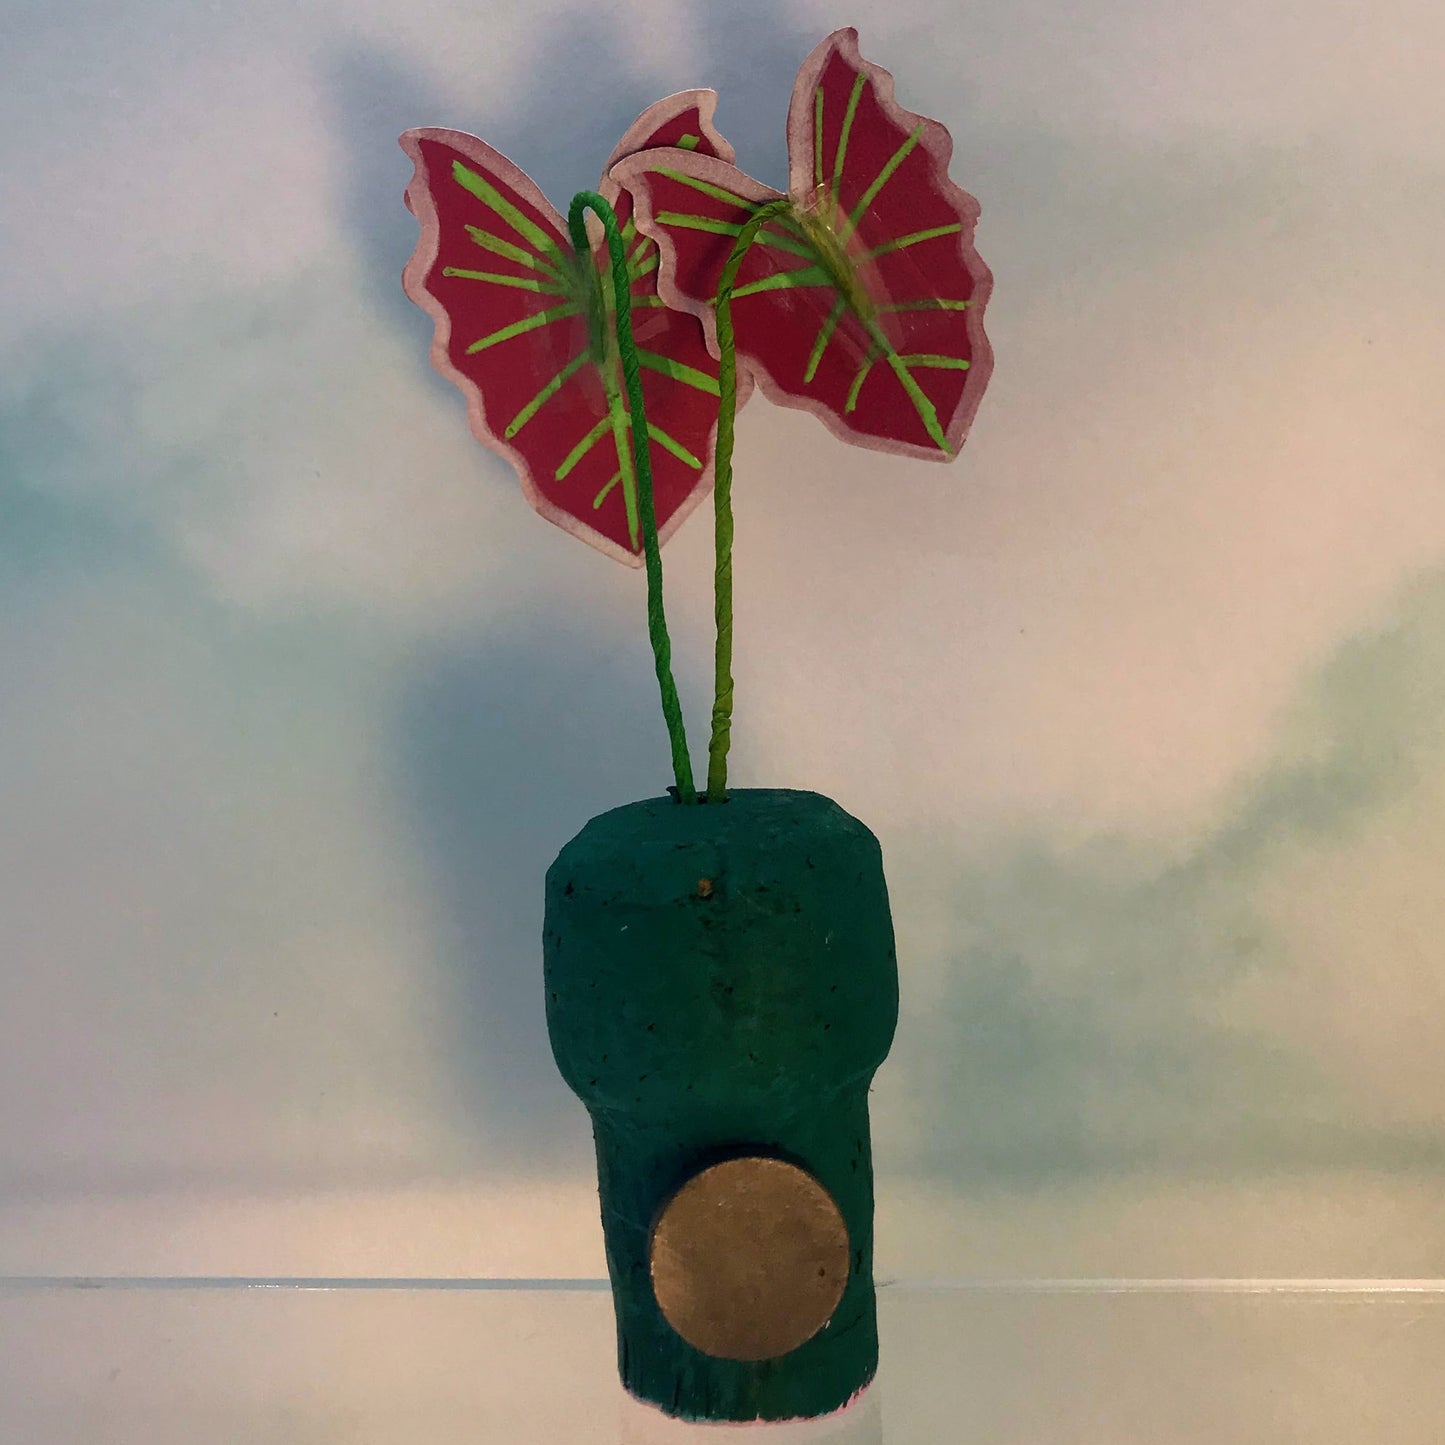 Pink Tiny Magical Paper House Plant in Upcycled Painted Cork - DECORATIVE MAGNET